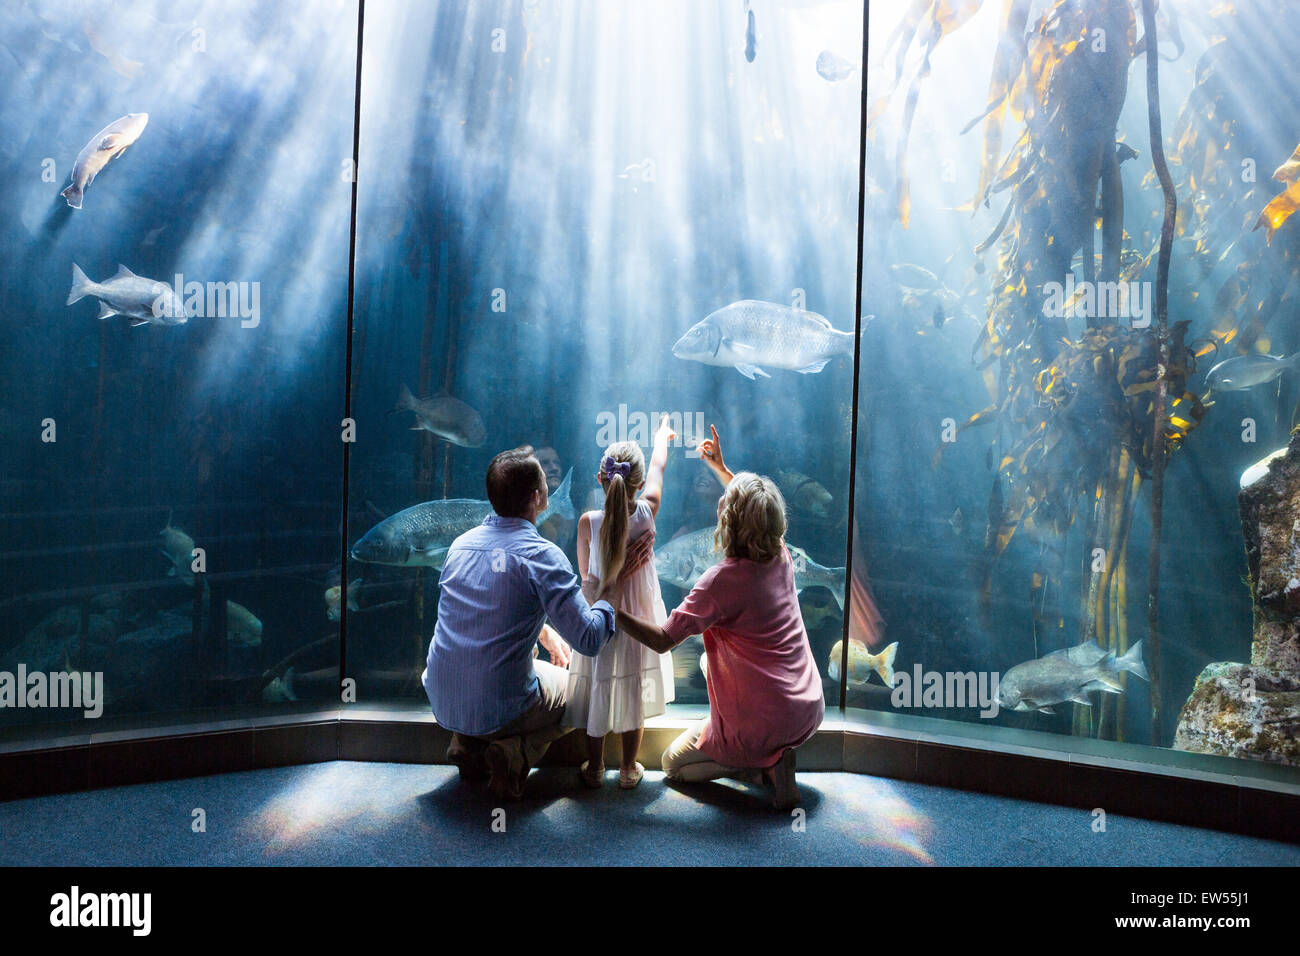 Wear view of family looking at fish tank Stock Photo